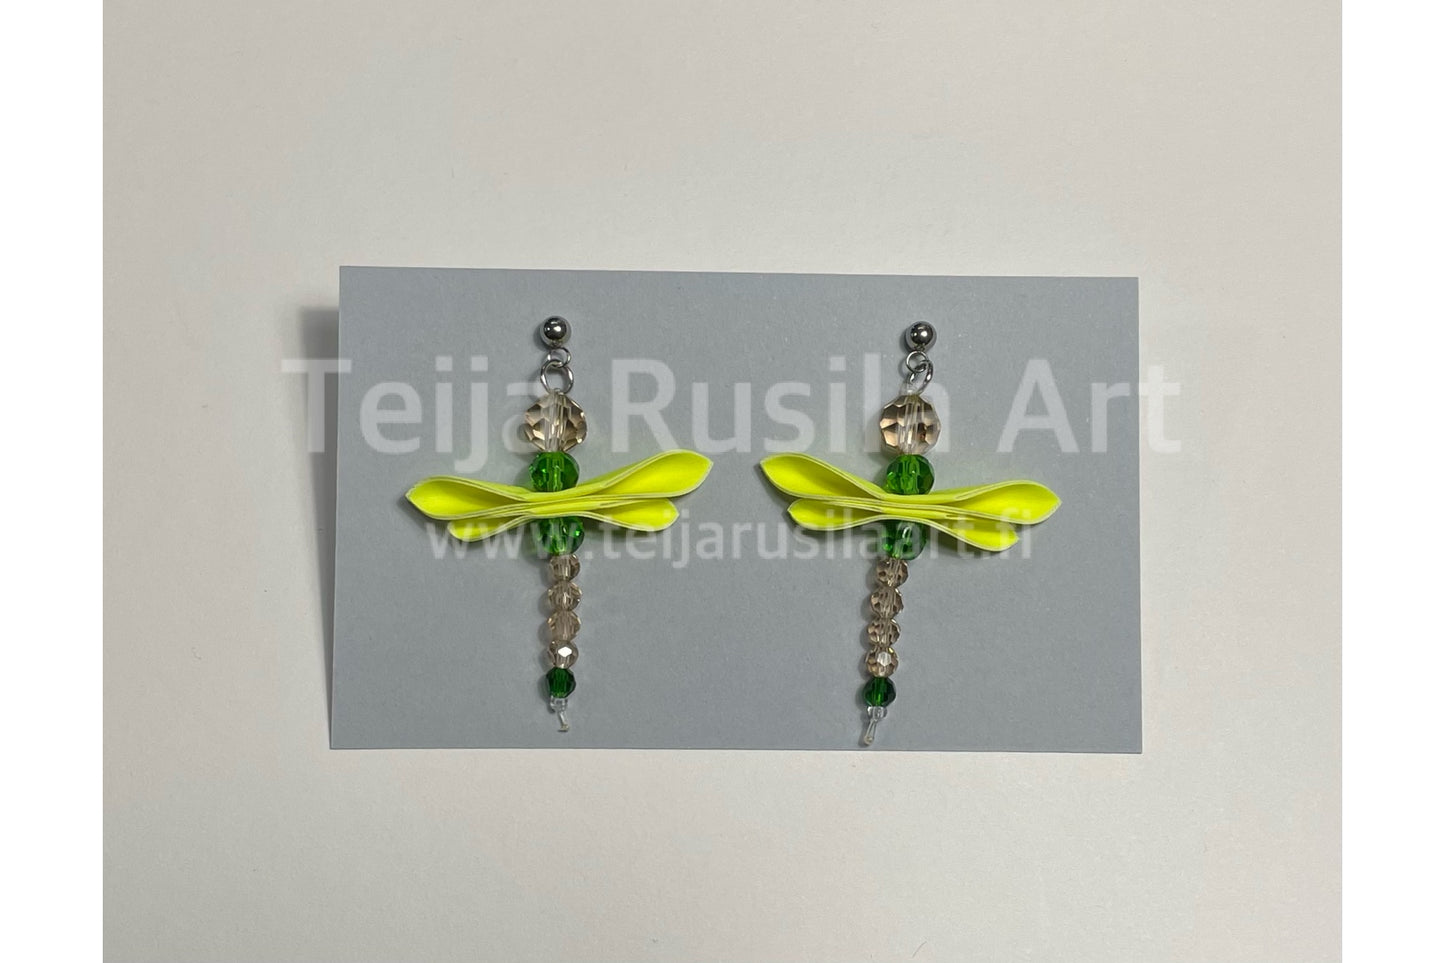 Teija Rusila Art | Excellent | Champagne/Yellow | surgical steel | 15